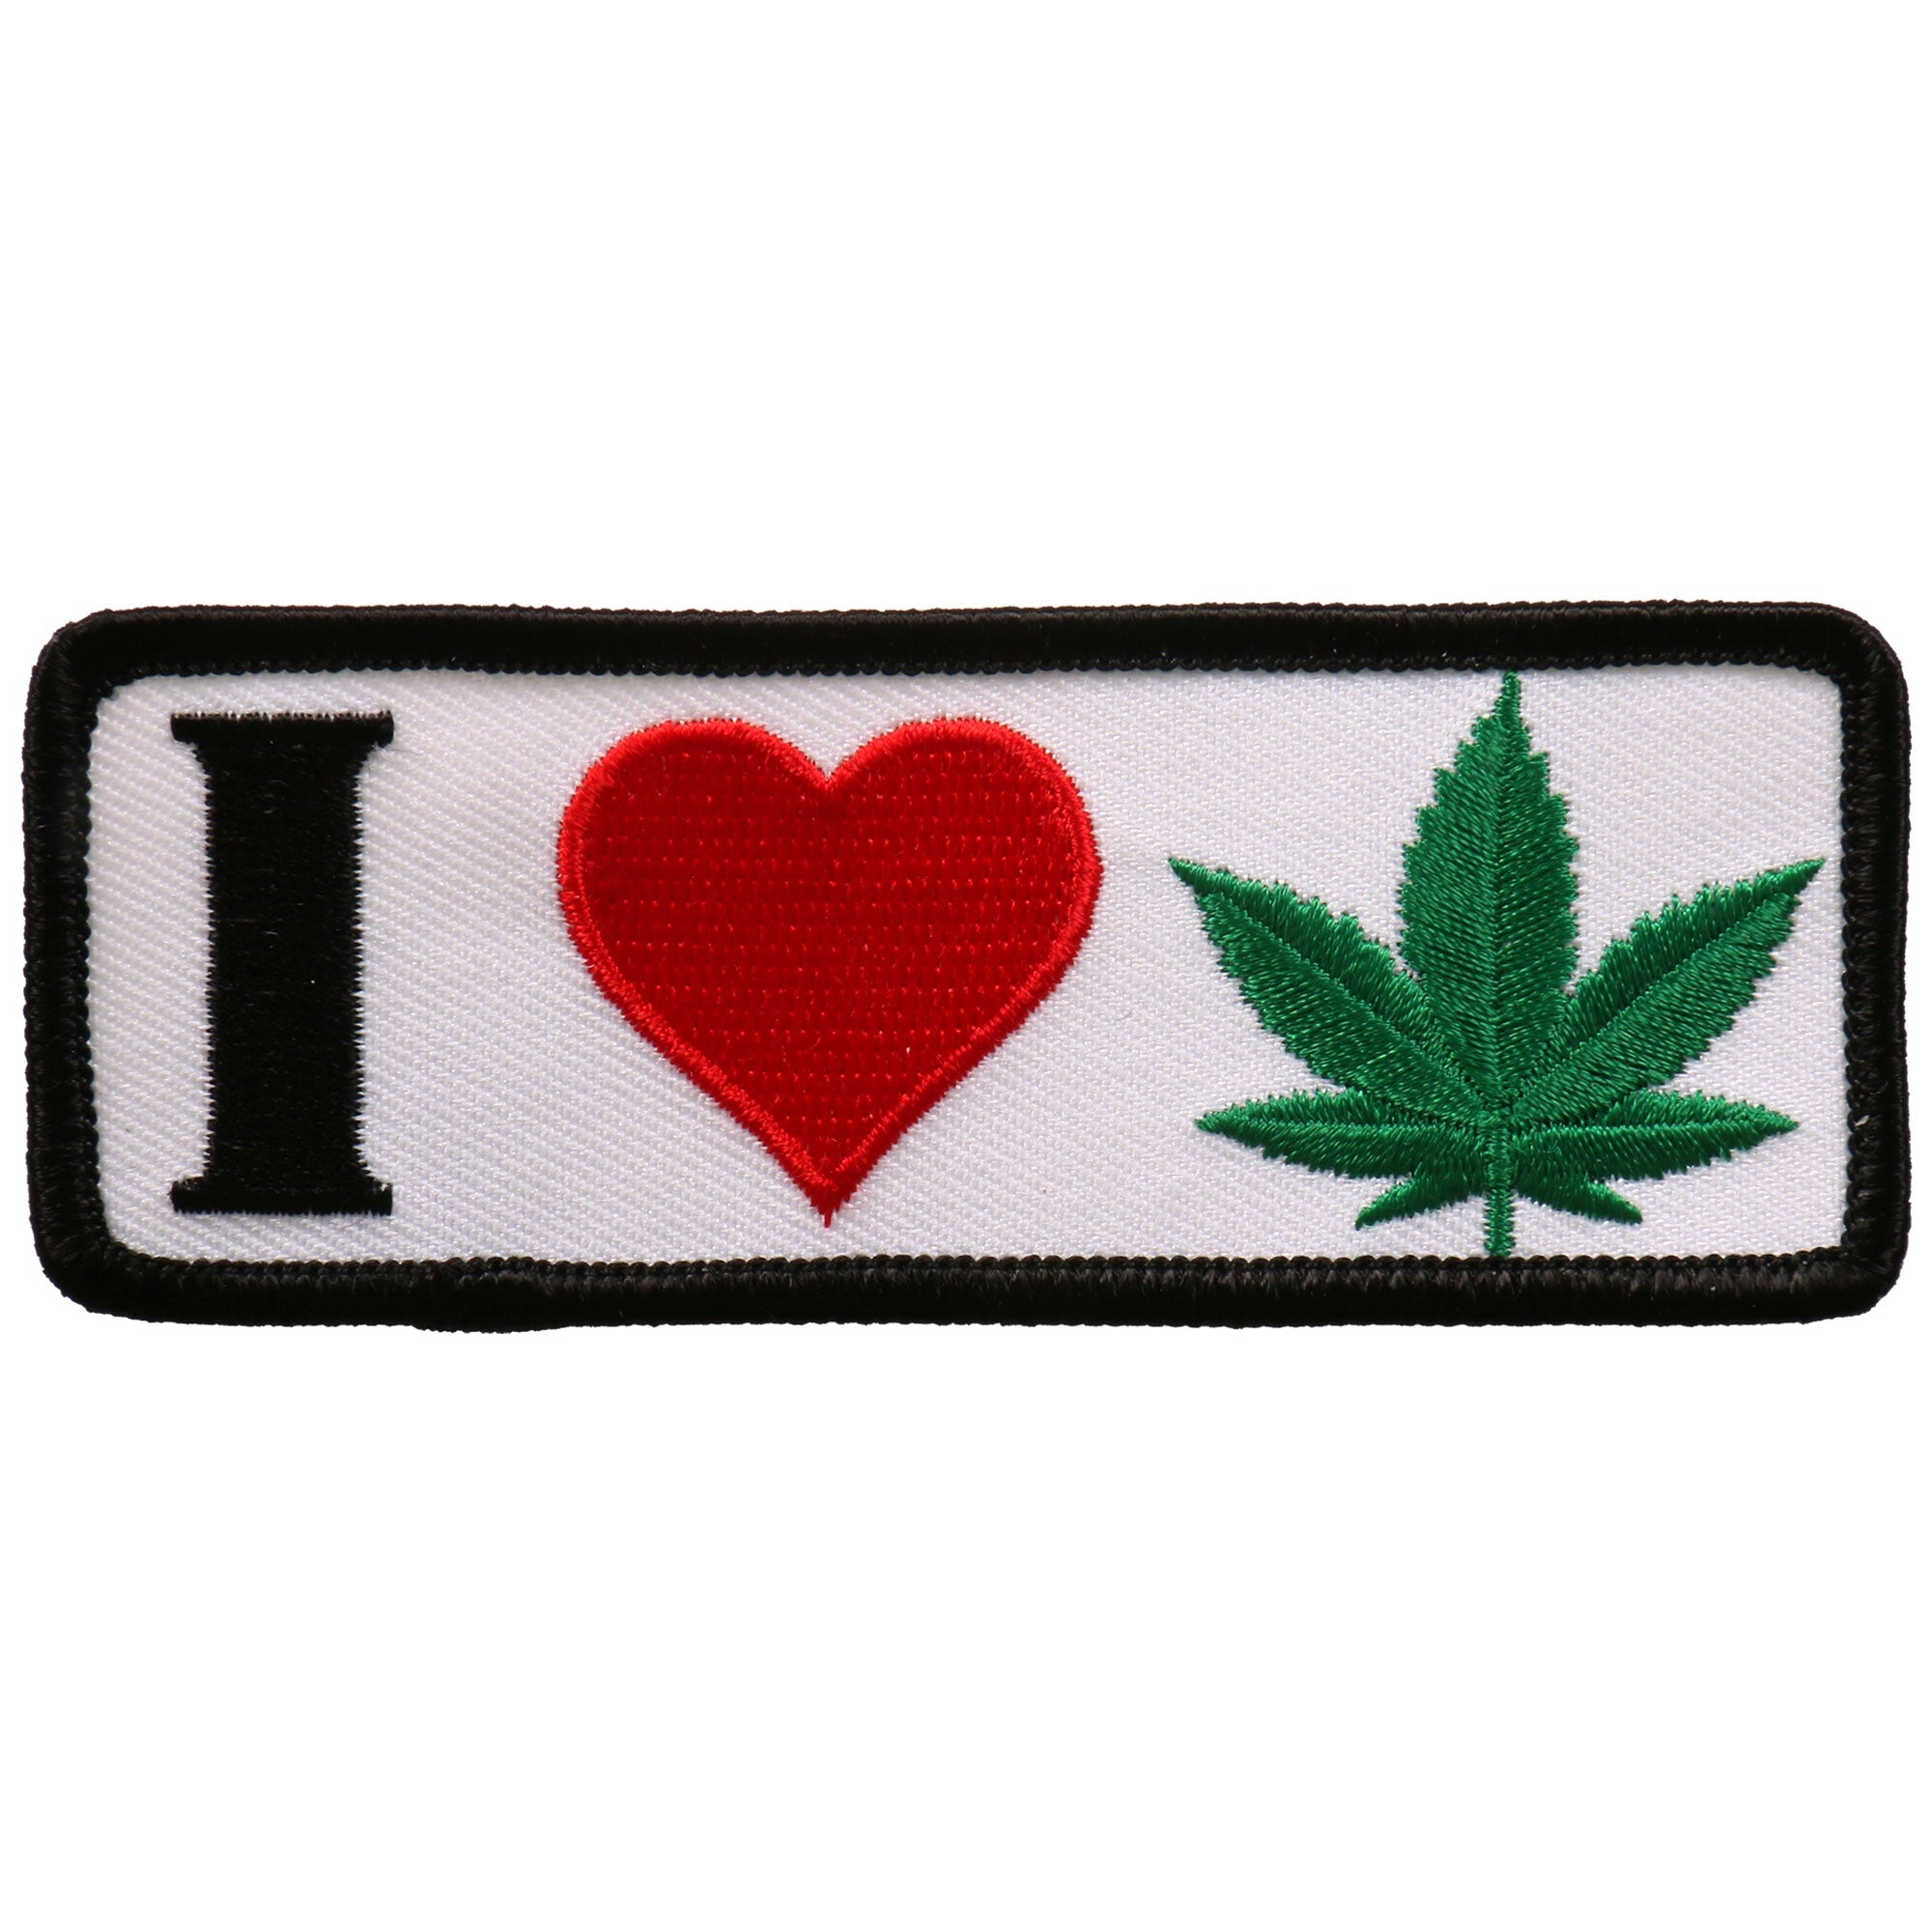 Hot Leathers I Heart Weed 4"x2" Patch PPL9684